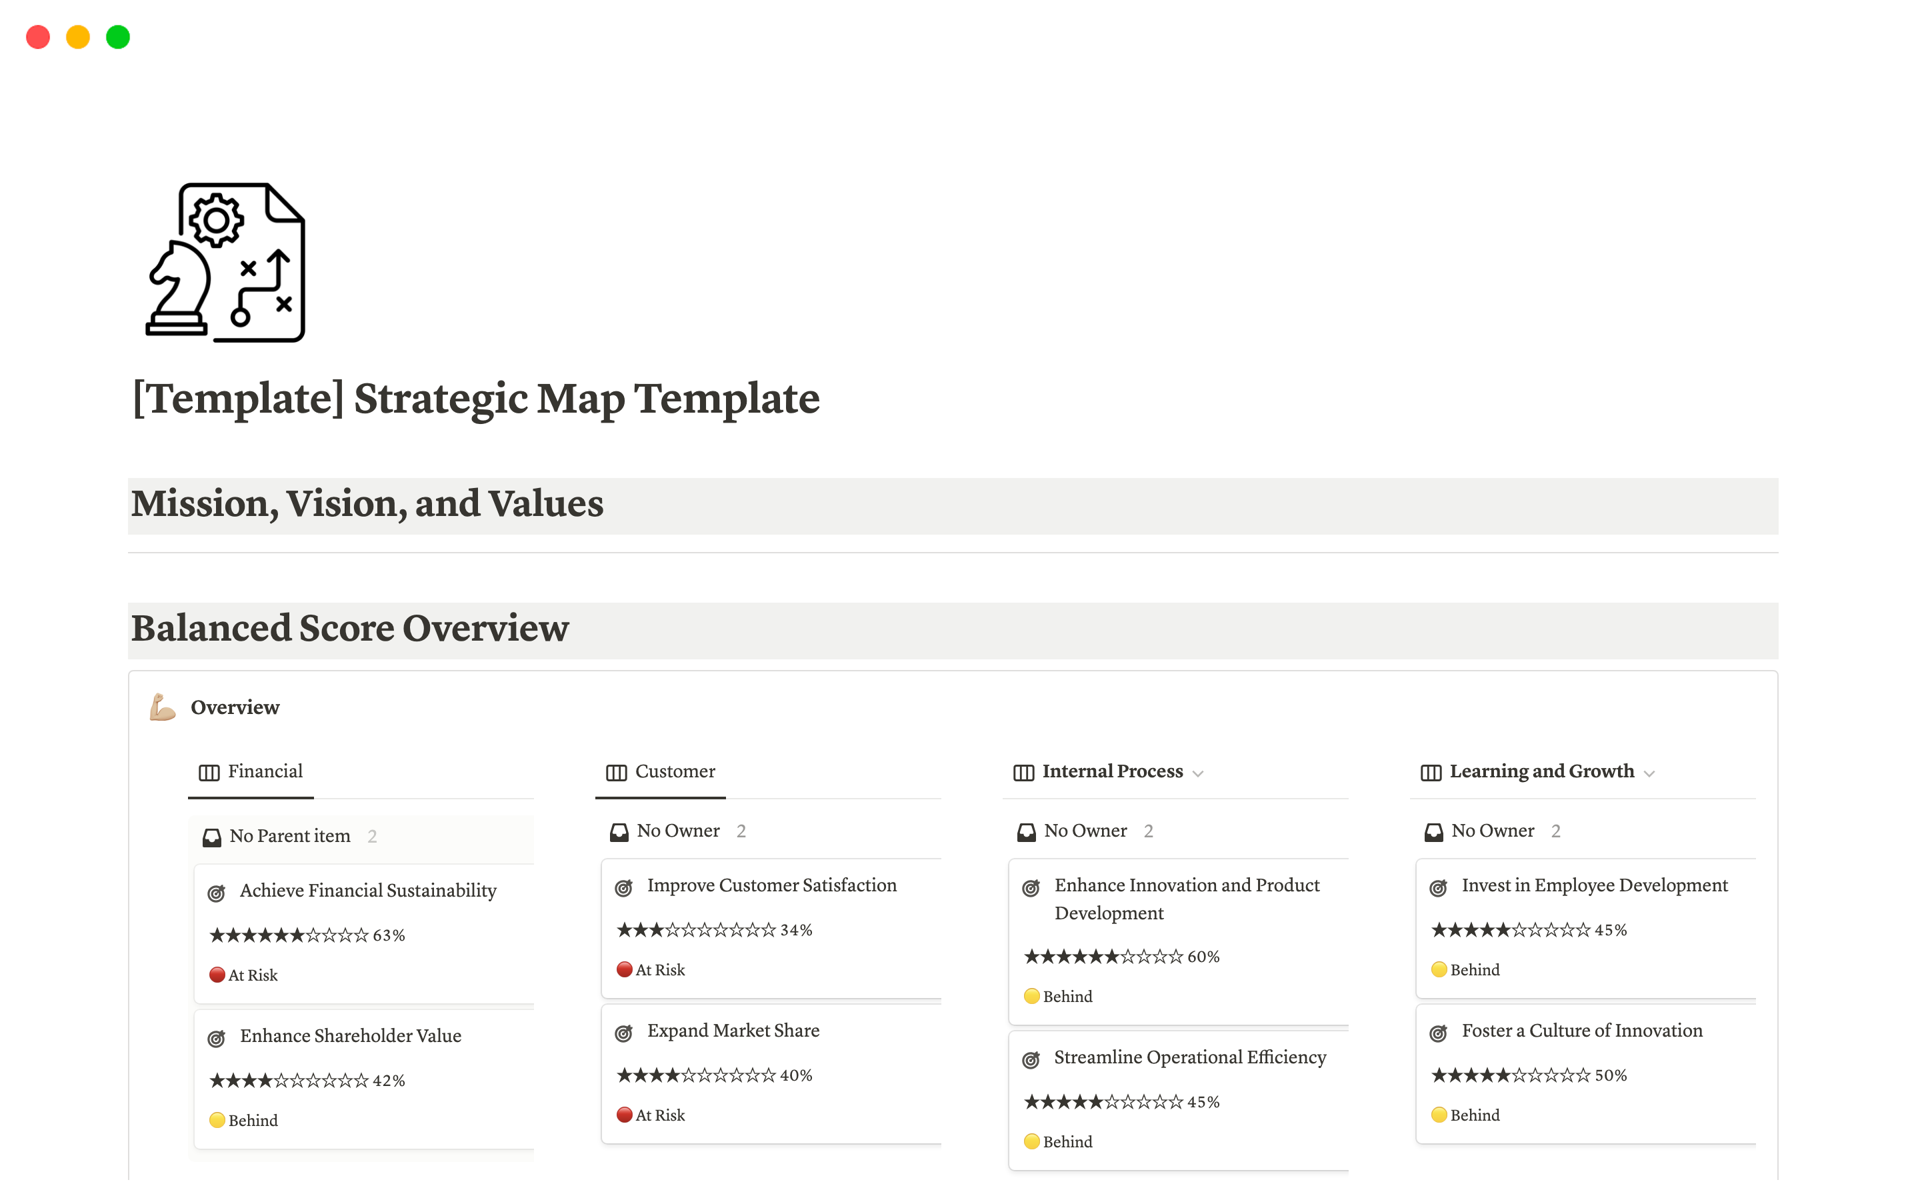 This Comprehensive Strategic Map template in Notion is designed to help organizations and professionals create a holistic view of their strategic direction. It combines essential elements of strategic planning.